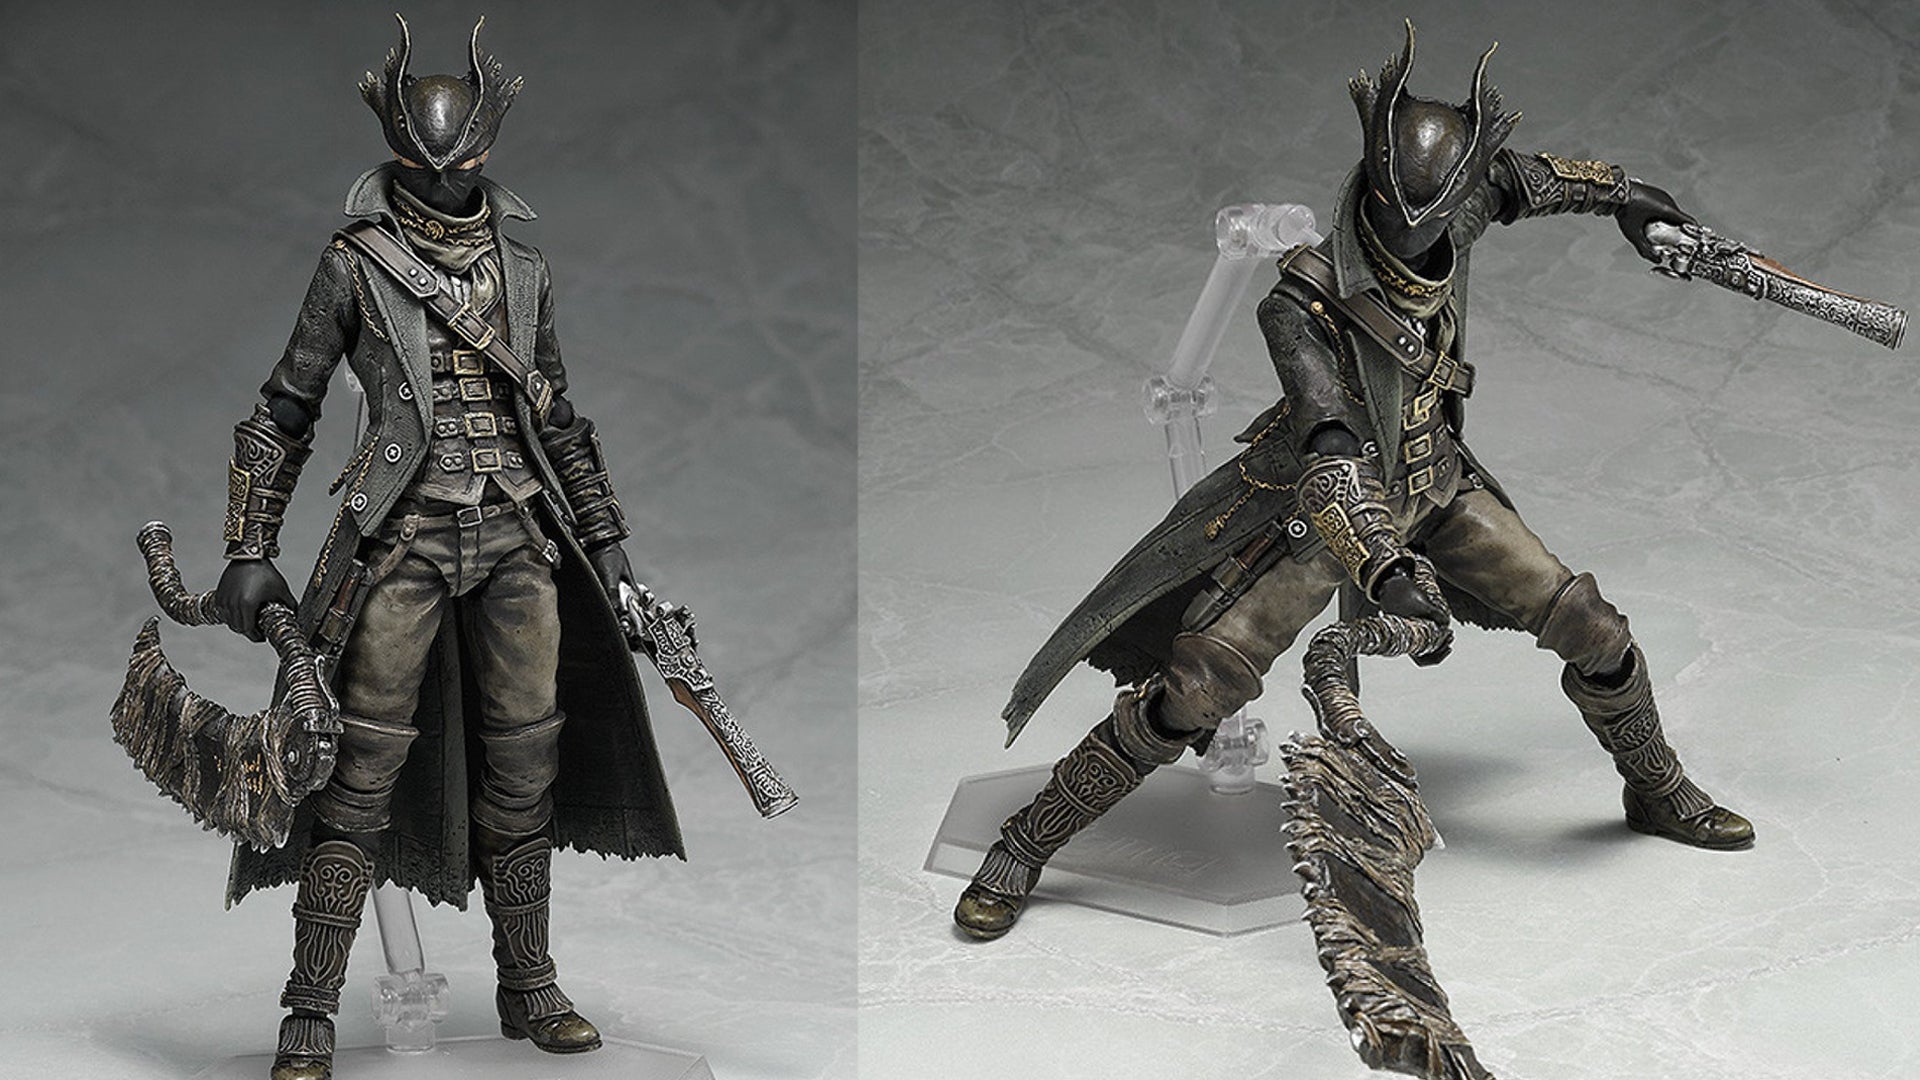 Image for Limited Edition Hunter from Bloodborne Figma Figurine up for Pre-Order